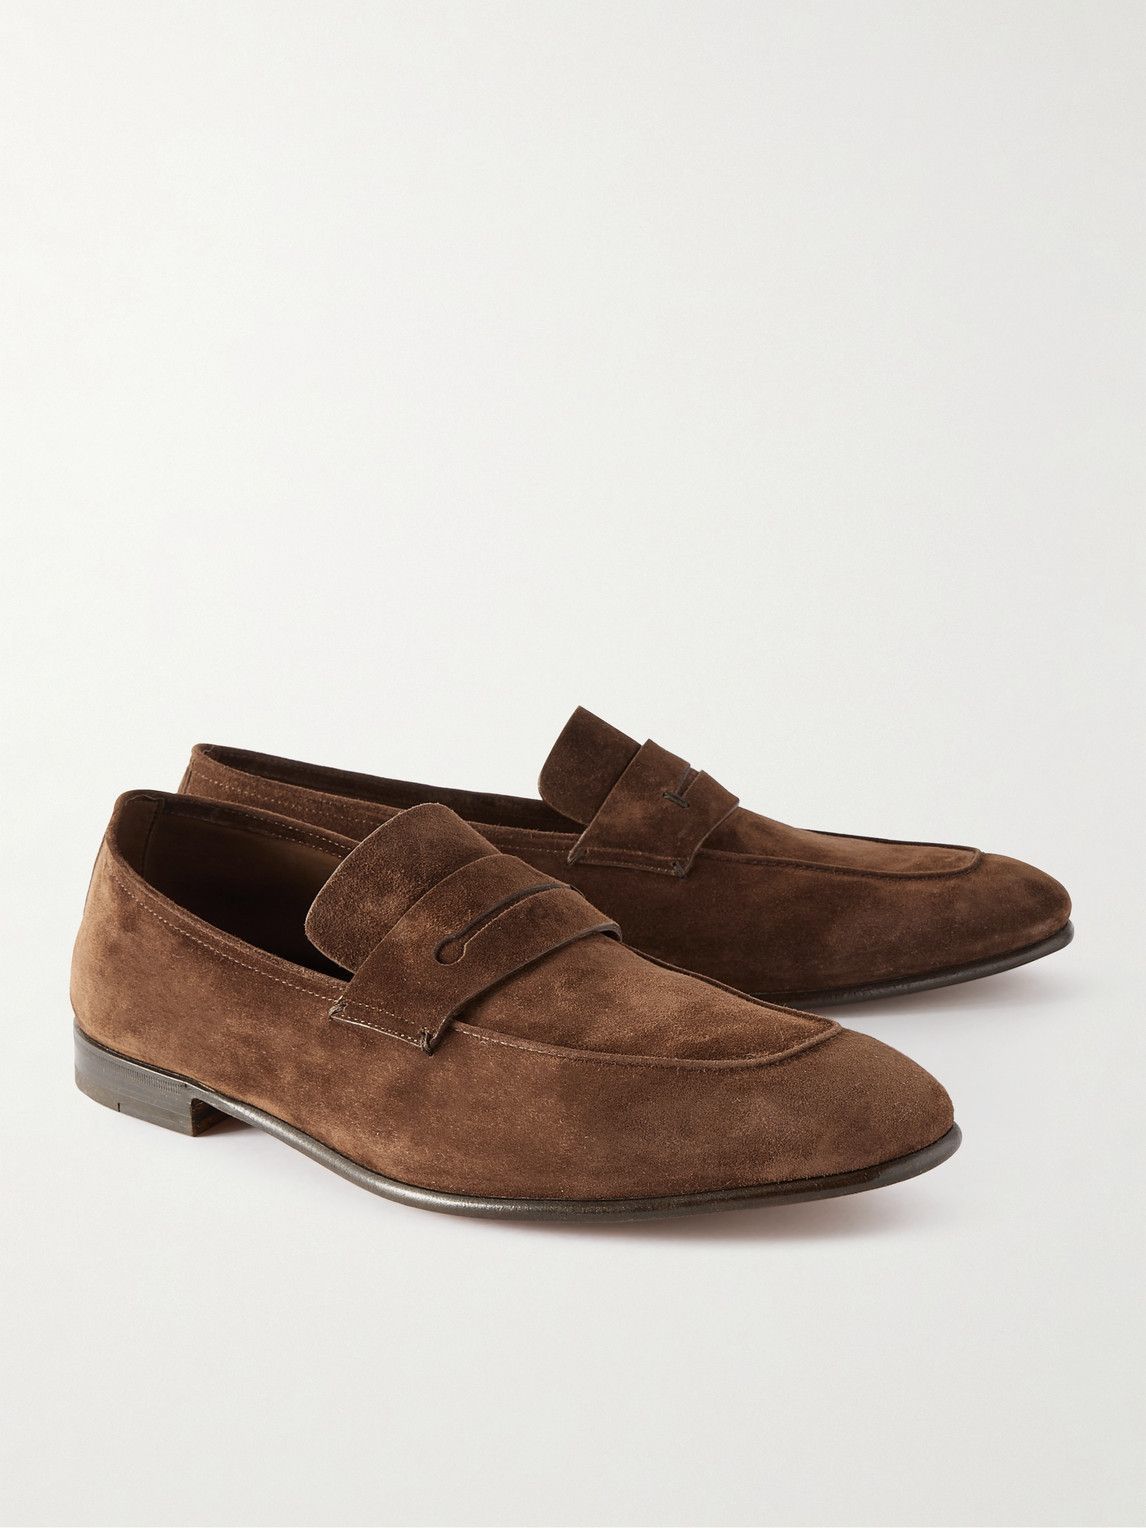 Zegna - L'Asola Suede Penny Loafers - Brown Zegna